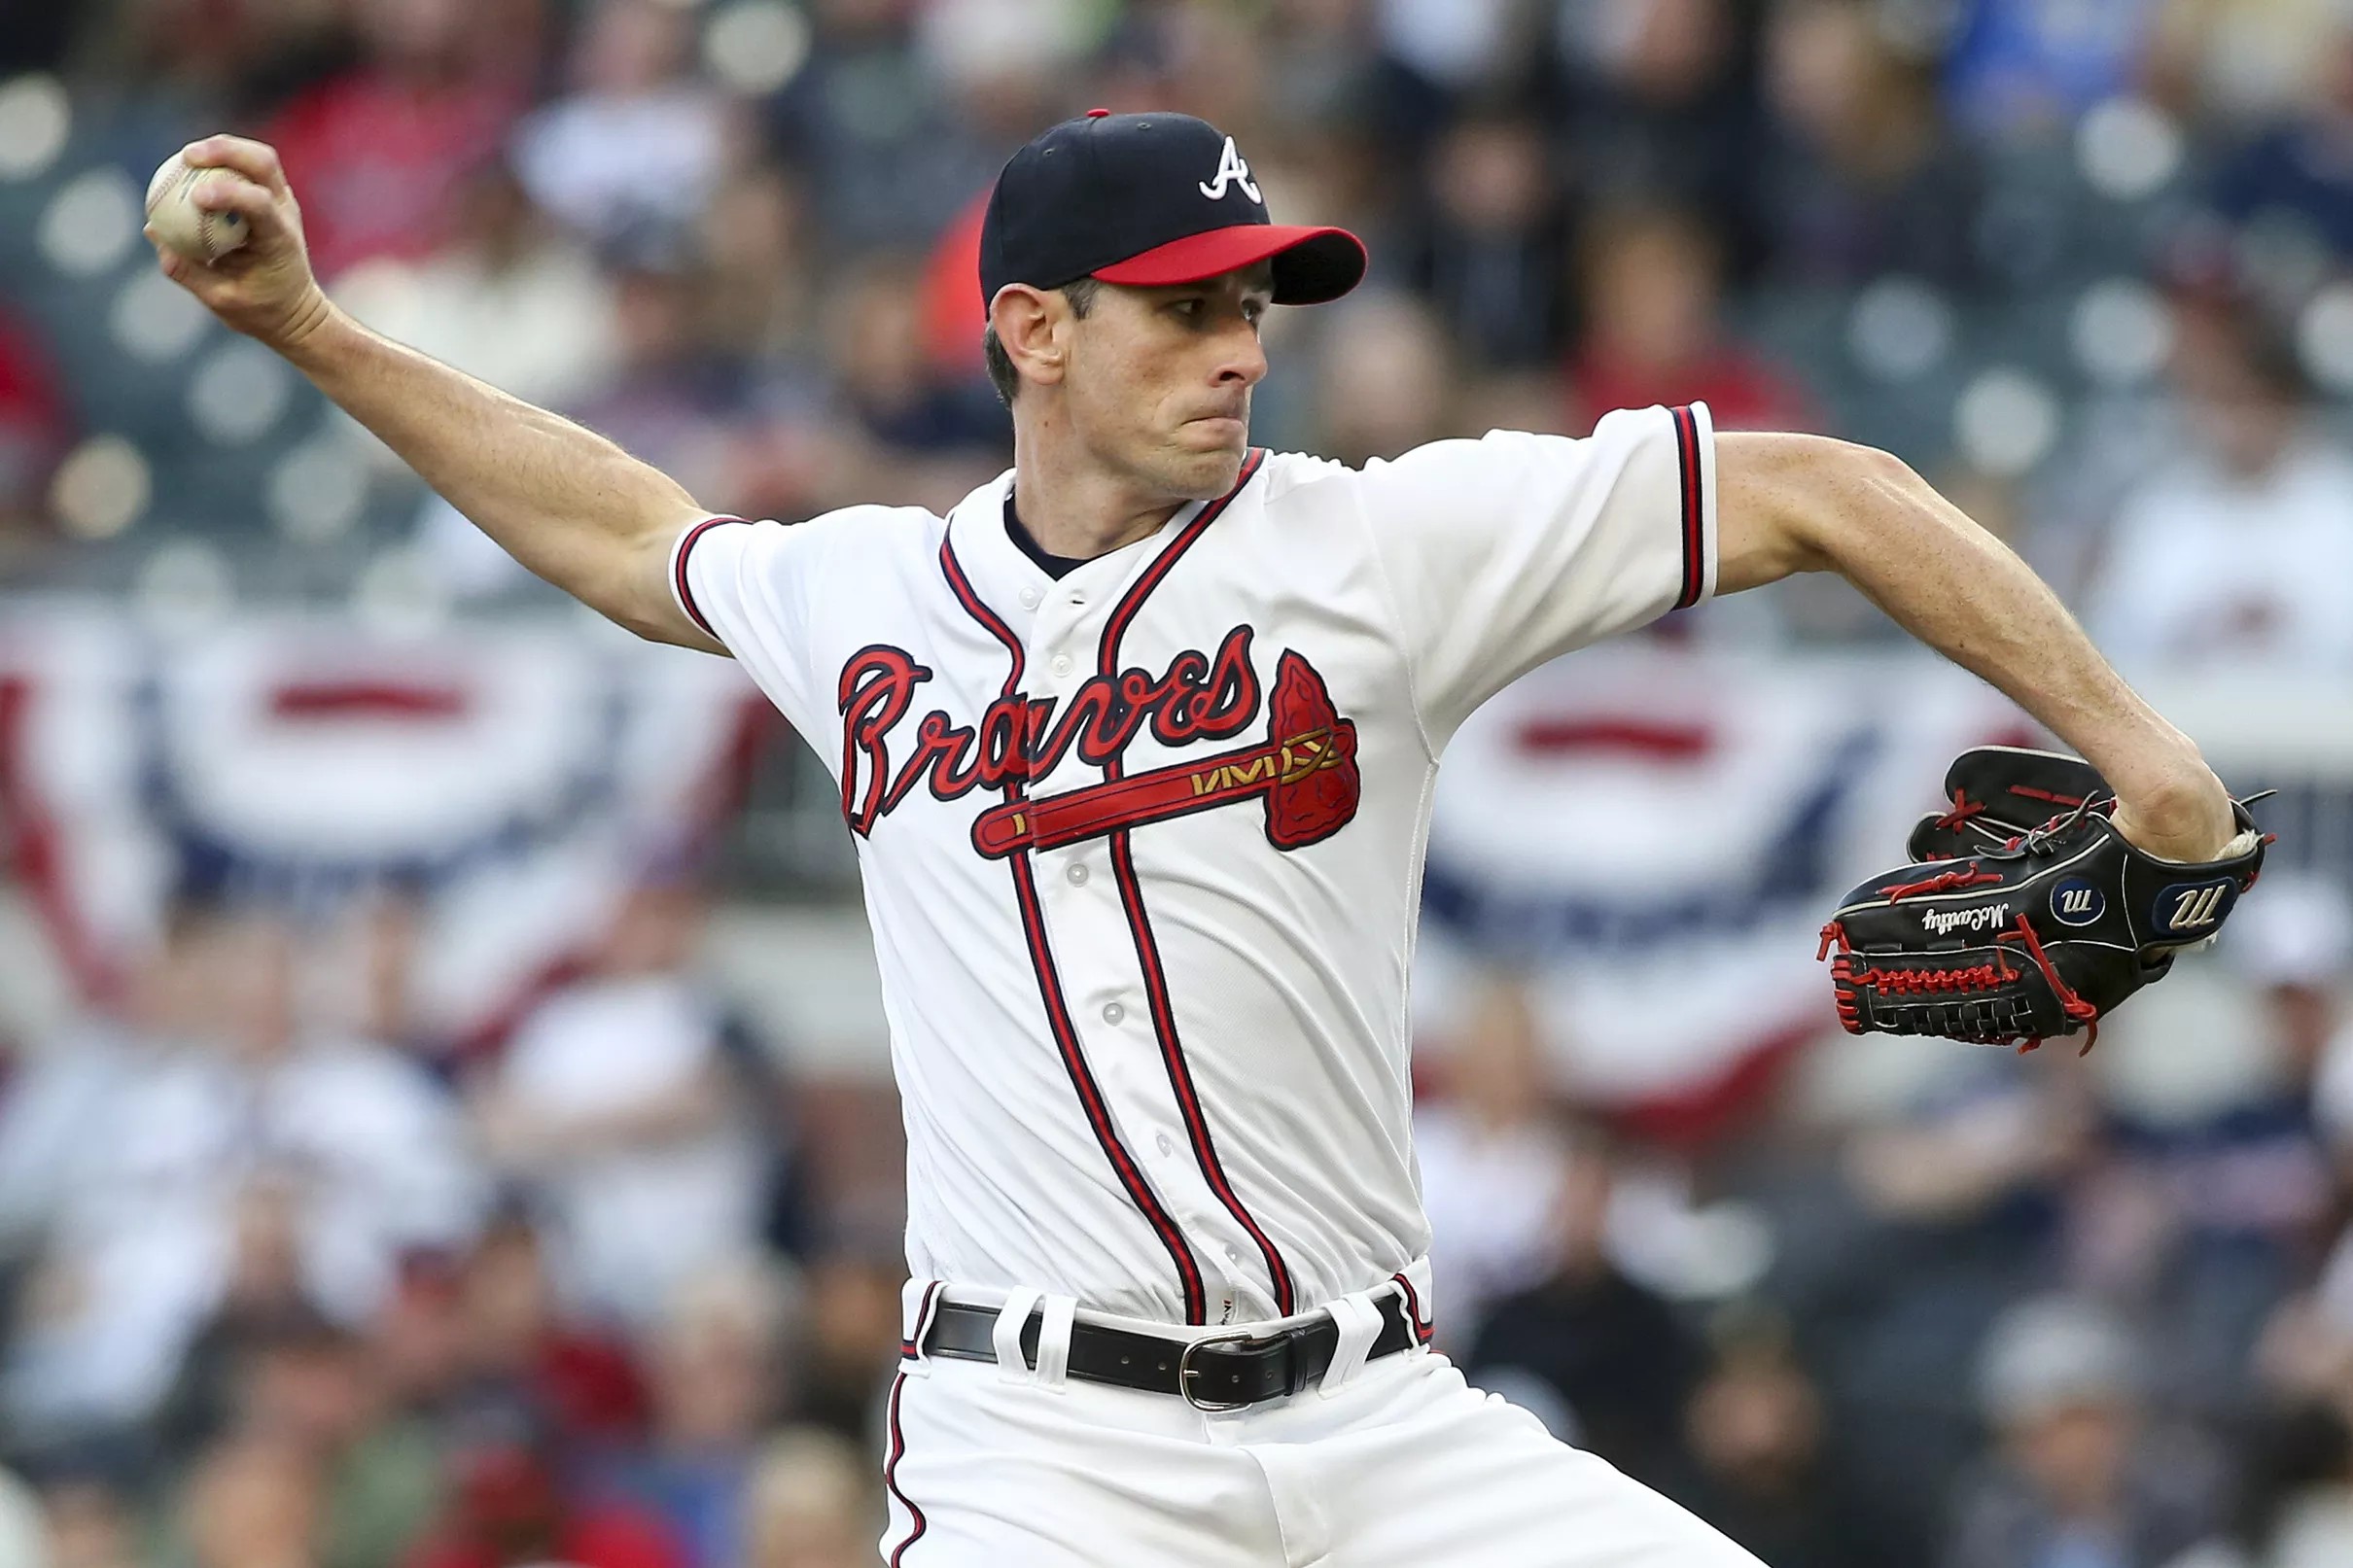 Braves look to secure series win against Phillies